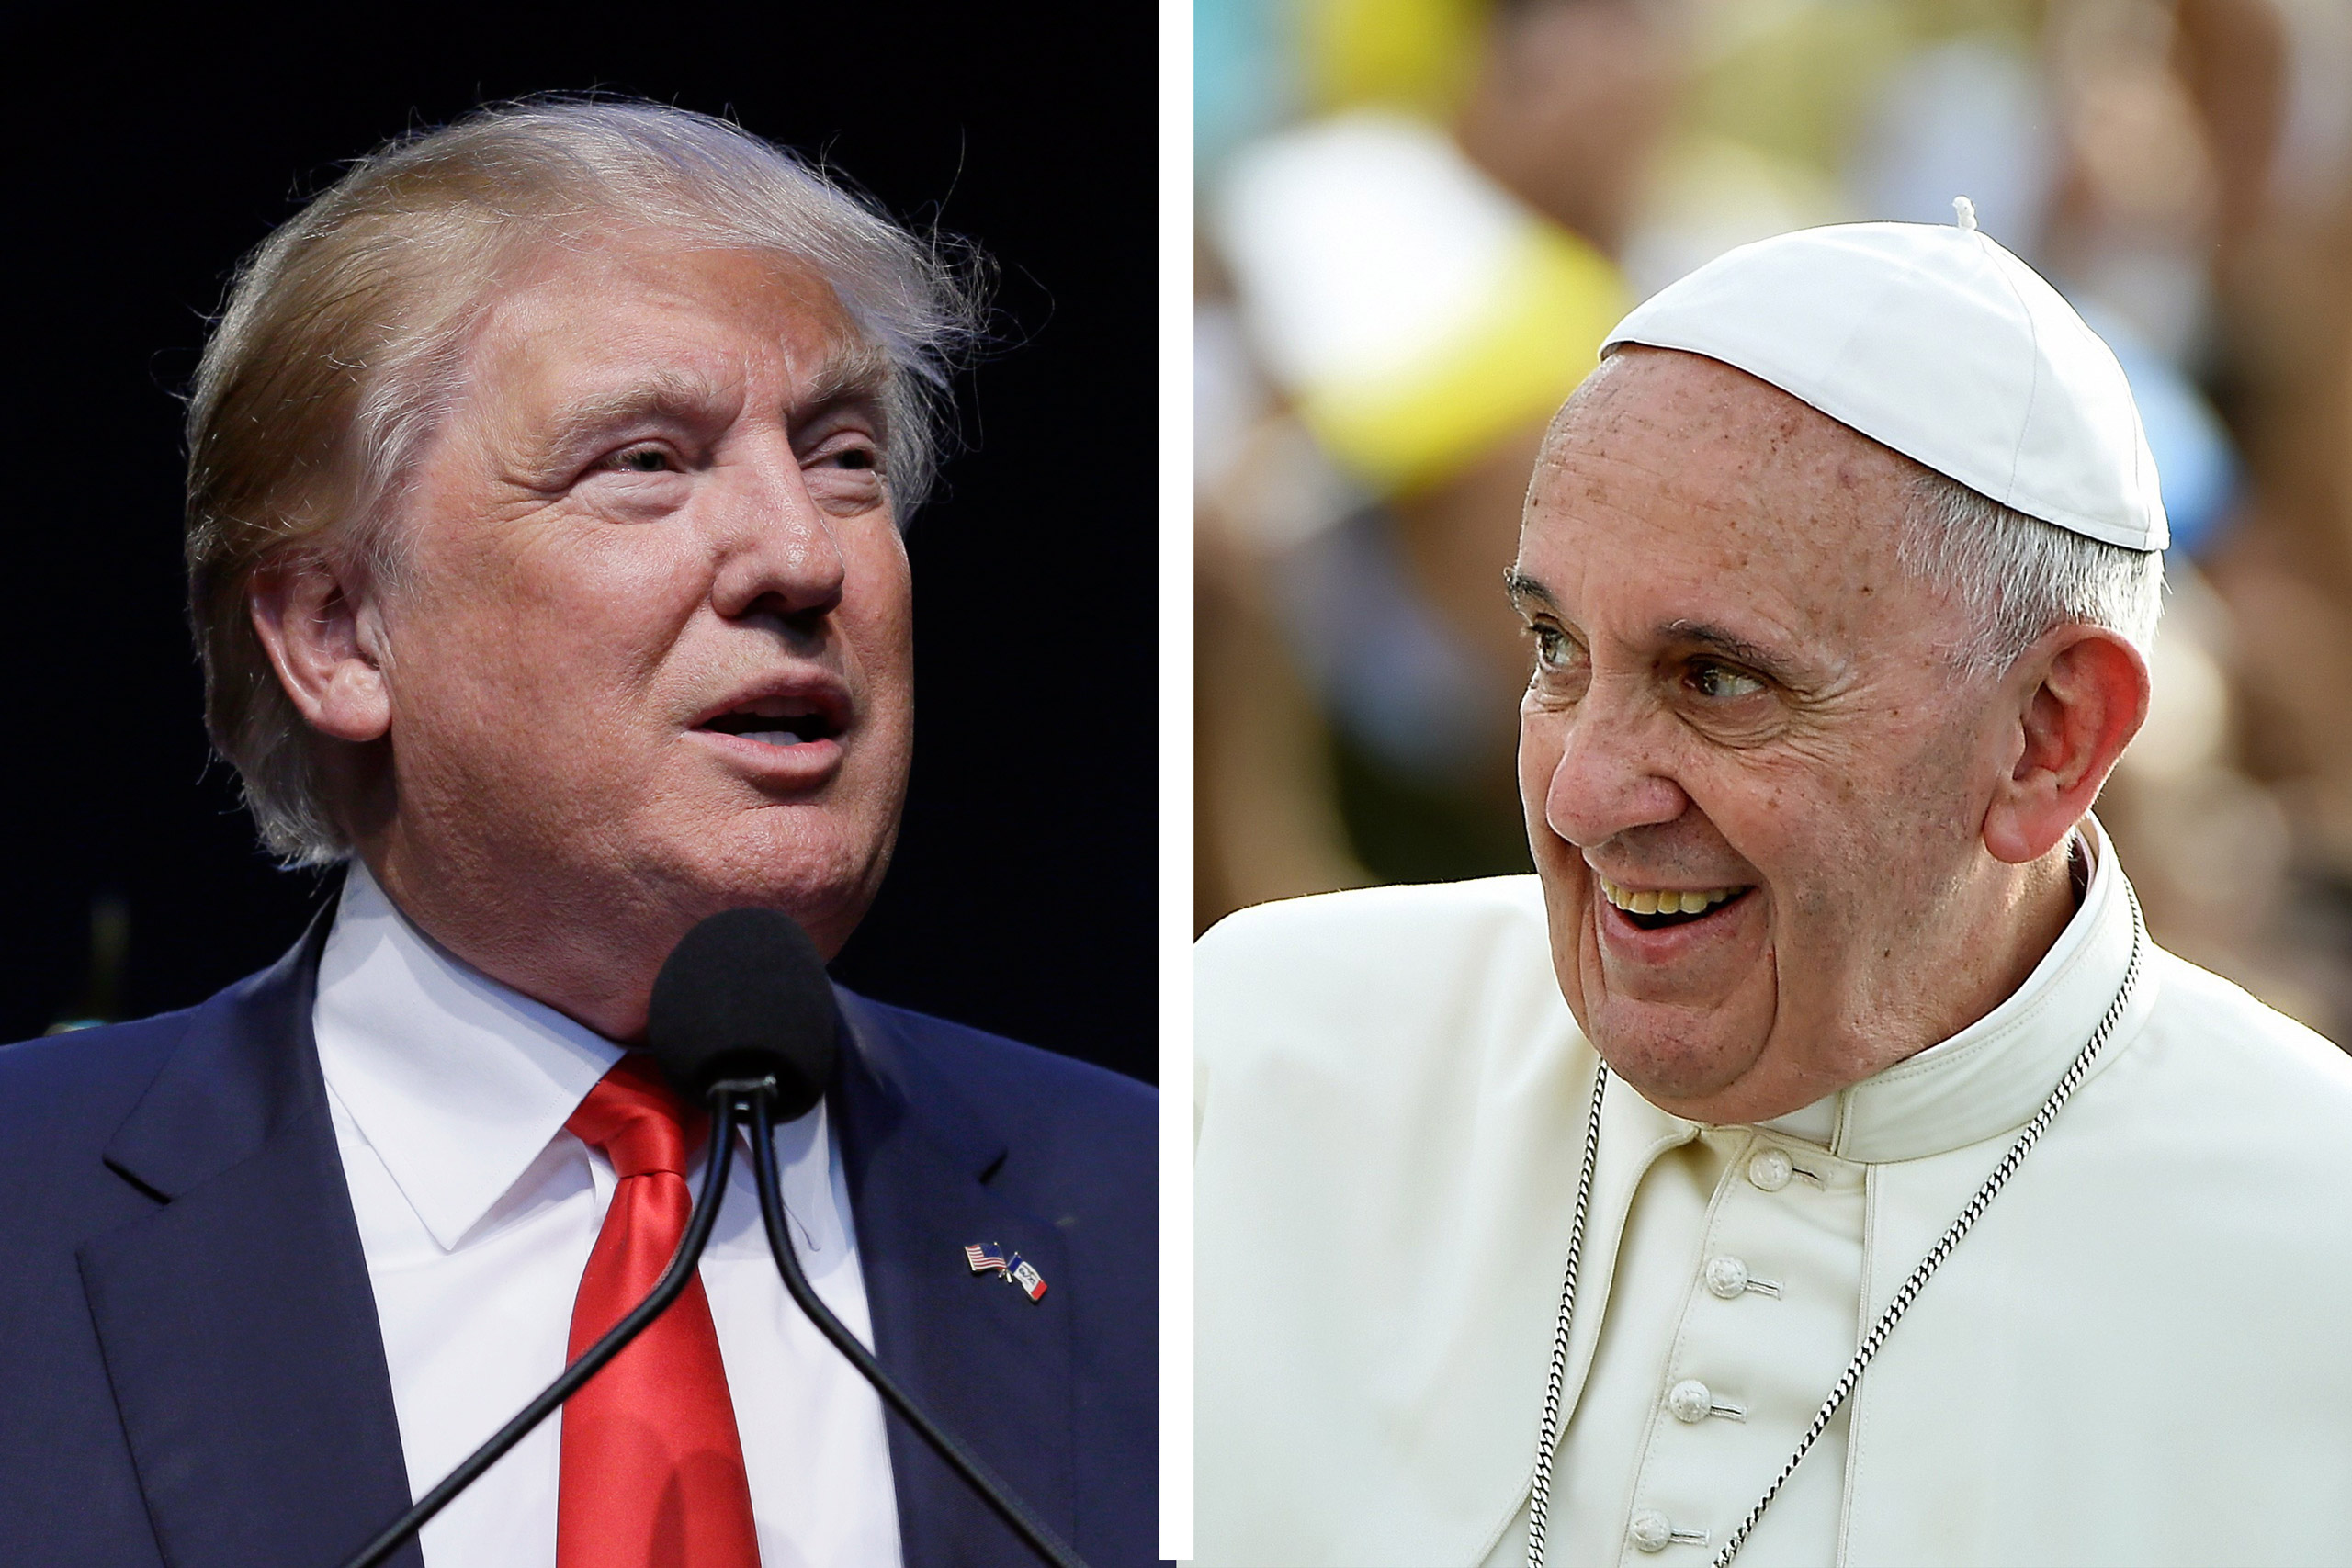 Medicinsk malpractice Umoderne Render The One Thing The Pope and The Donald Have in Common | Time